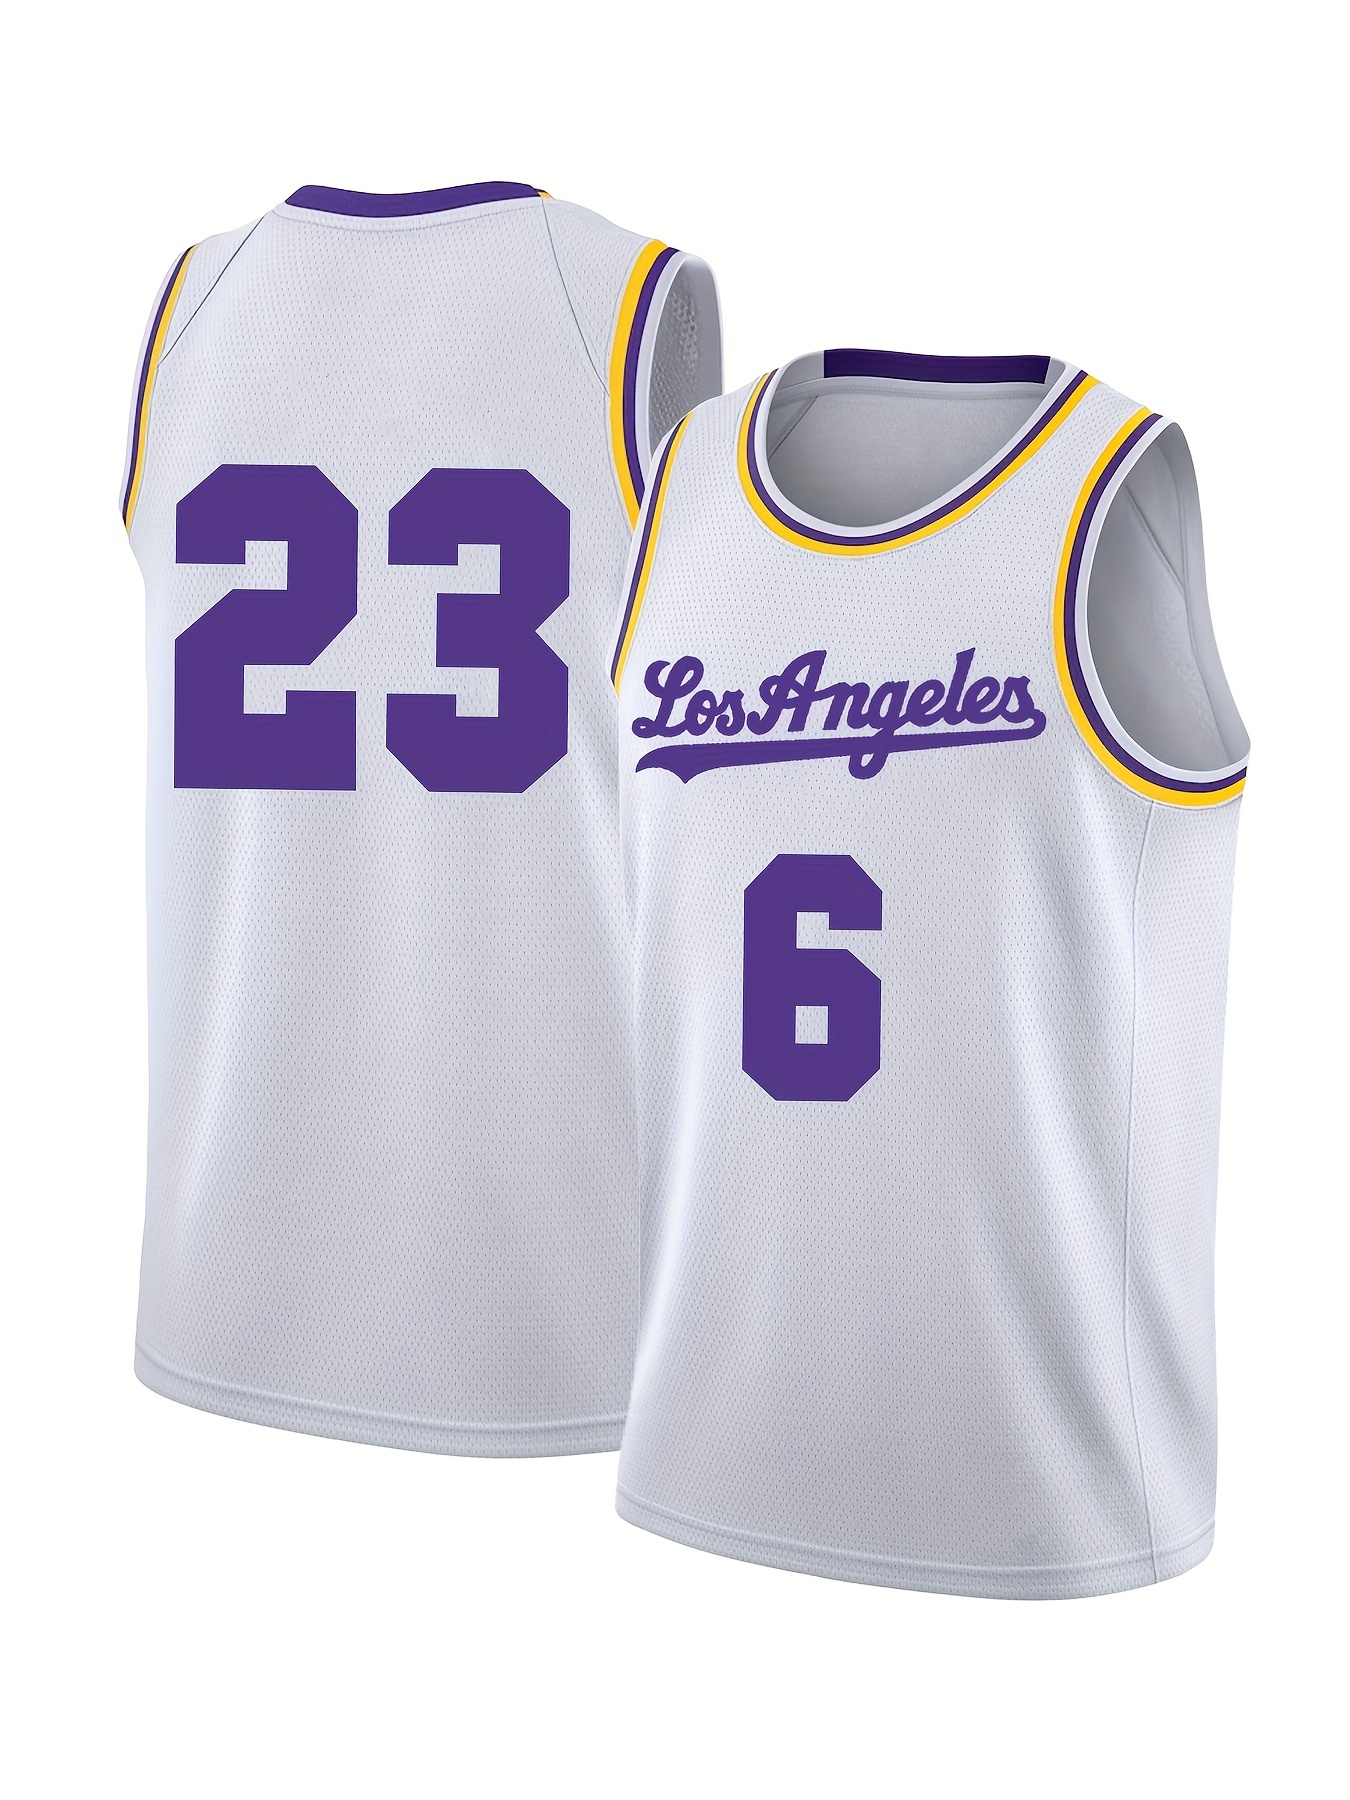 Boy's Legend #8/24 Embroidered Basketball Jersey, Retro Breathable Sports  Uniform, Sleeveless Basketball Shirt For Fans Party Gifts - Temu